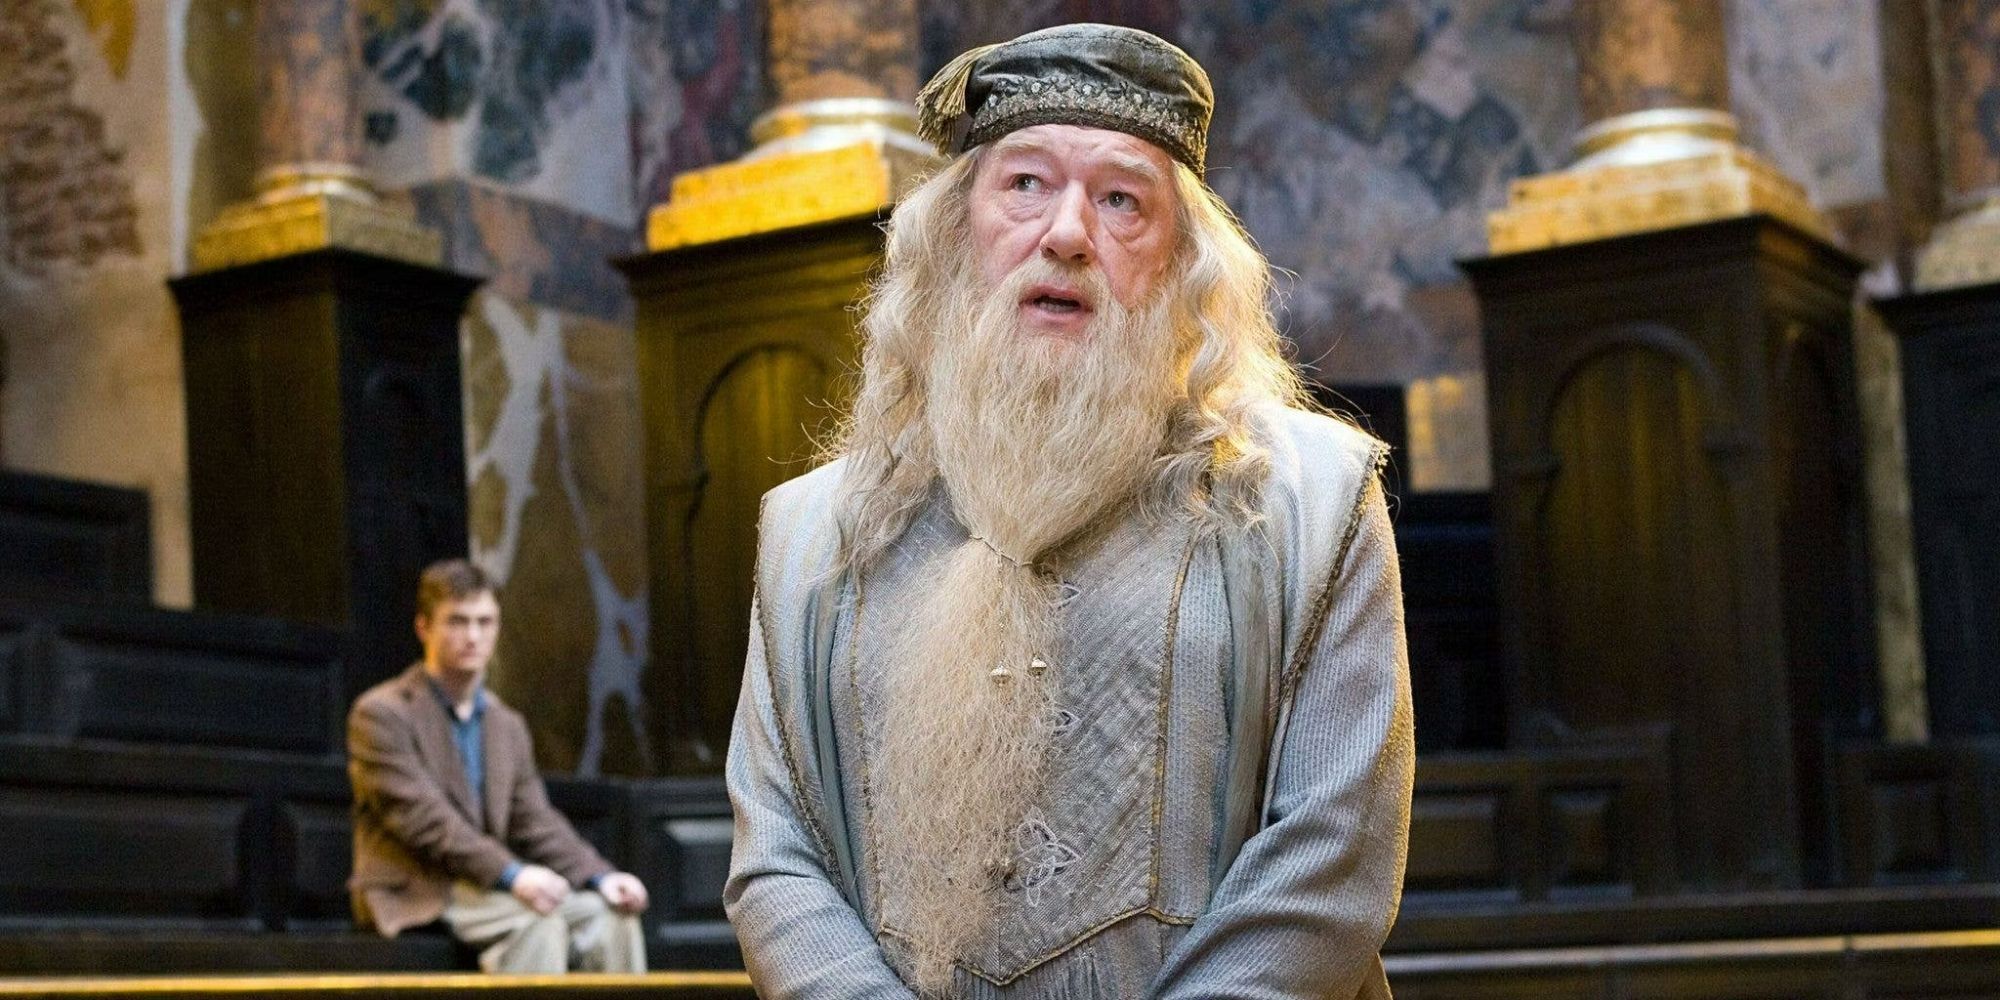 Albus-Dumbledore-Harry-Potter-and-the-Order-of-the-Phoenix (1)